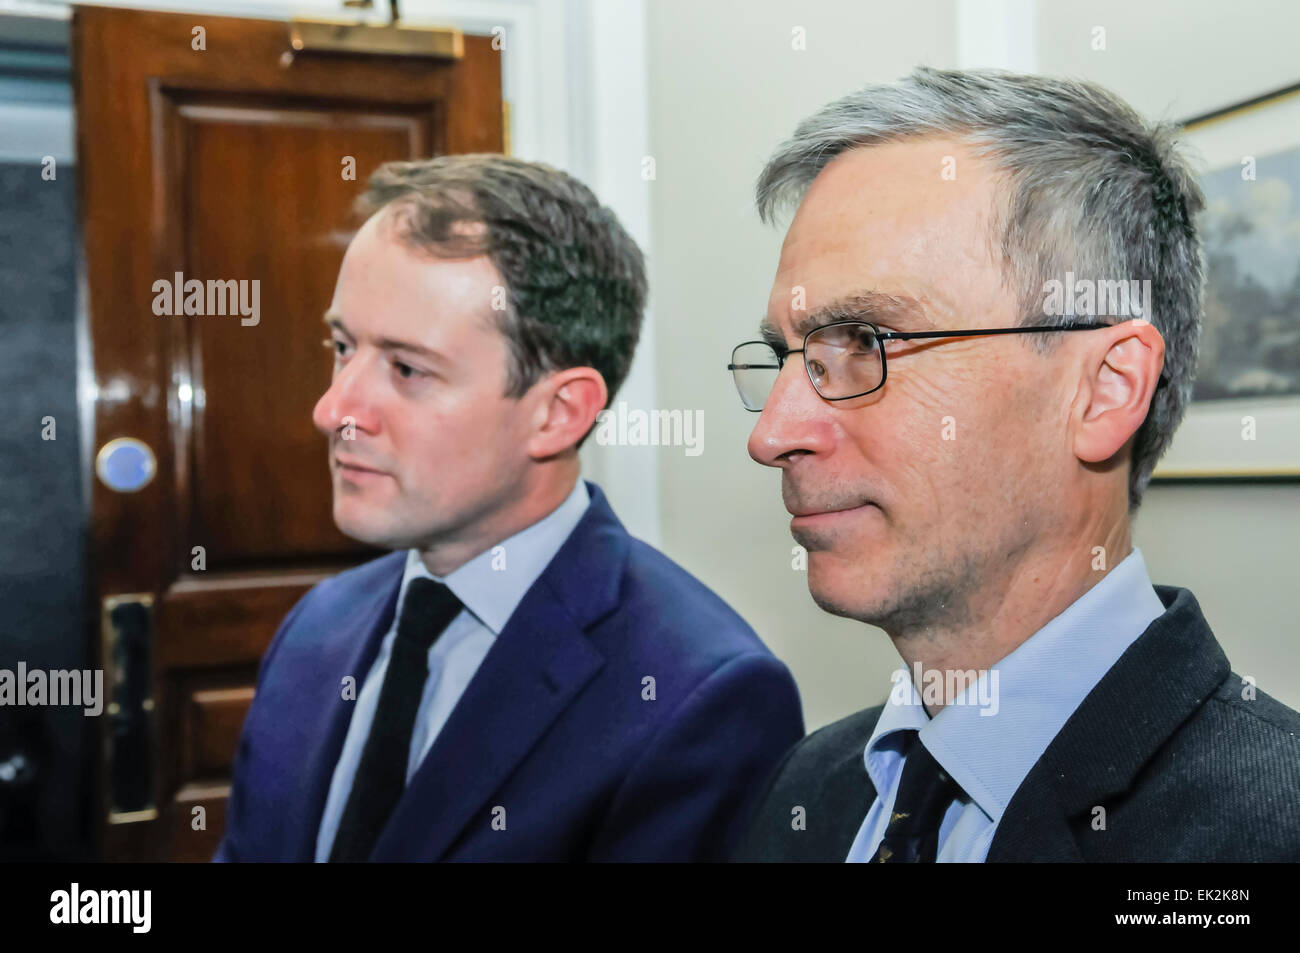 Belfast, Northern Ireland. 23 Dec 2014 - Sean Sherlock, Irish Minister of State with special responsibility for ODA, Trade Promotion & North South Cooperation (Department of Foreign Affairs and Trade), with Andrew Murrison, UK Minister of State for Northern Ireland during negotiations for the Stormont House Agreement Stock Photo